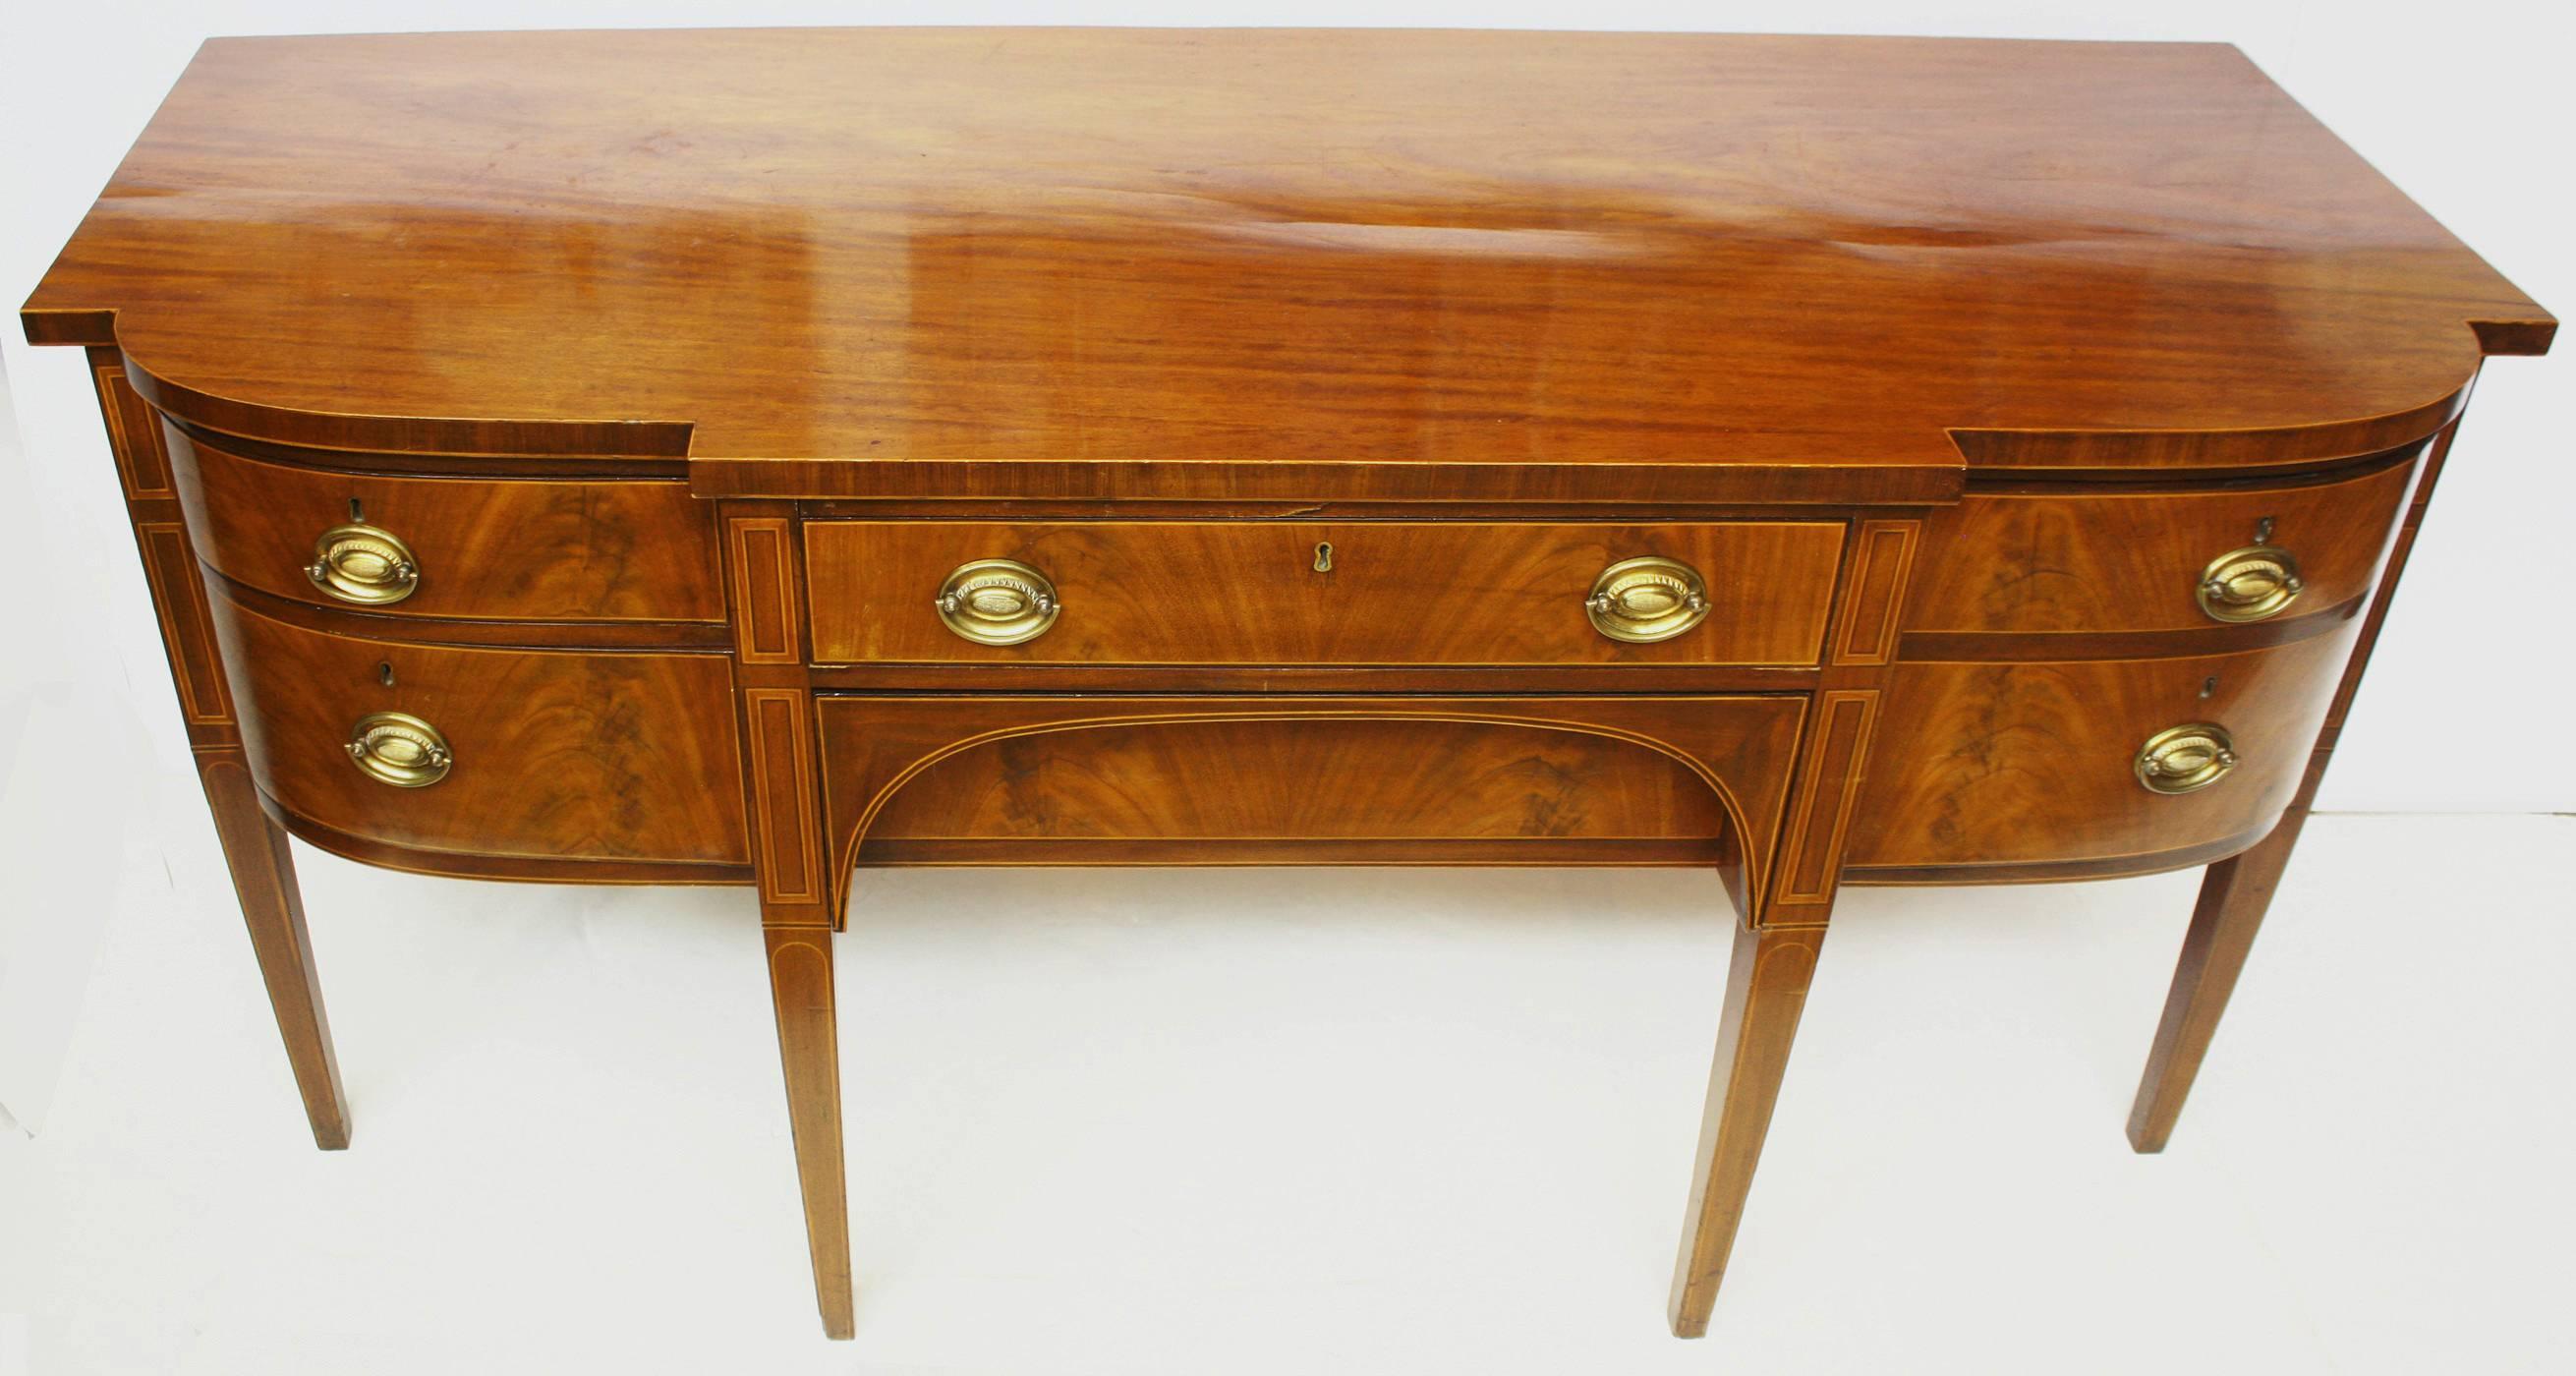 A Georgian sideboard of bookmatched crotch / flame mahogany. Wide center drawer, over an arched recessed drawer, flanked on right by a curved cellarette and a drawer and door on left, resting on tall tapered square legs. Boxwood stringing around